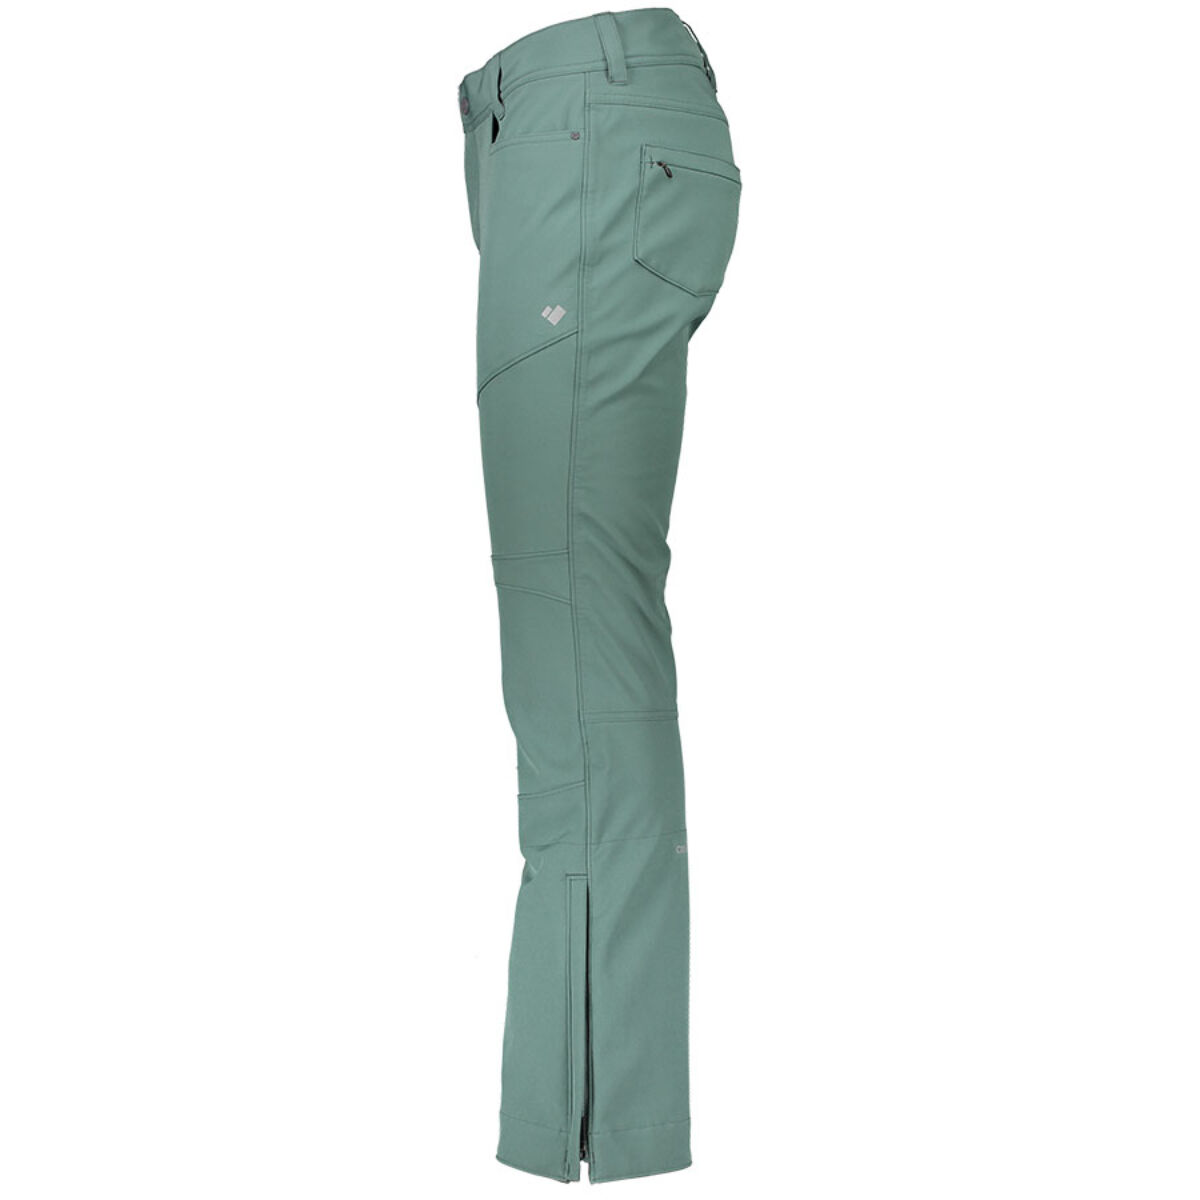 obermeyer glyph tech softshell pants for sale, OFF 76%